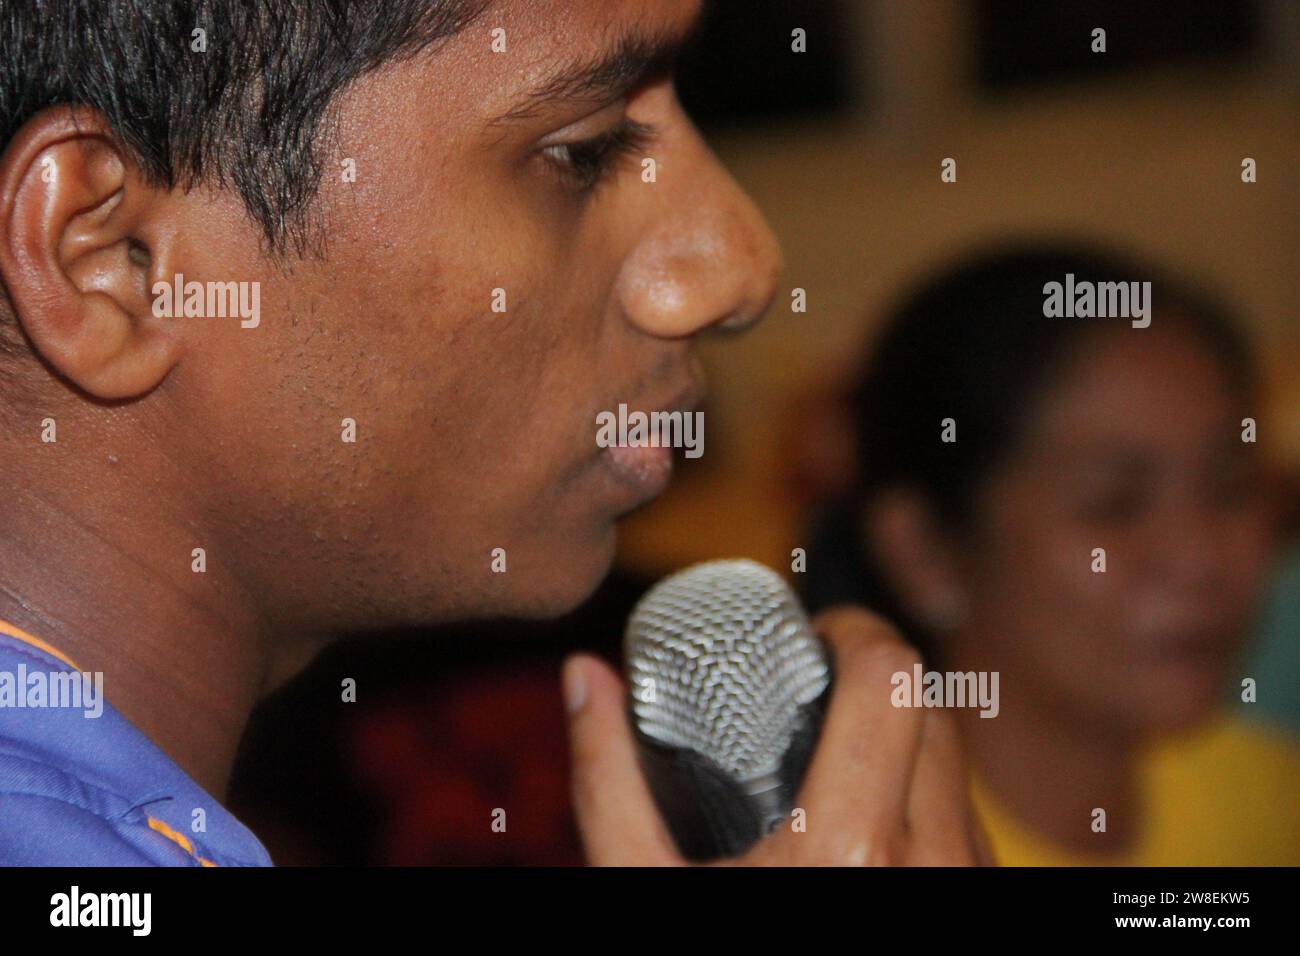 Maldives - October 4, 2013 : Home Karaoke entrainment between friends with Asian ethnicity Stock Photo